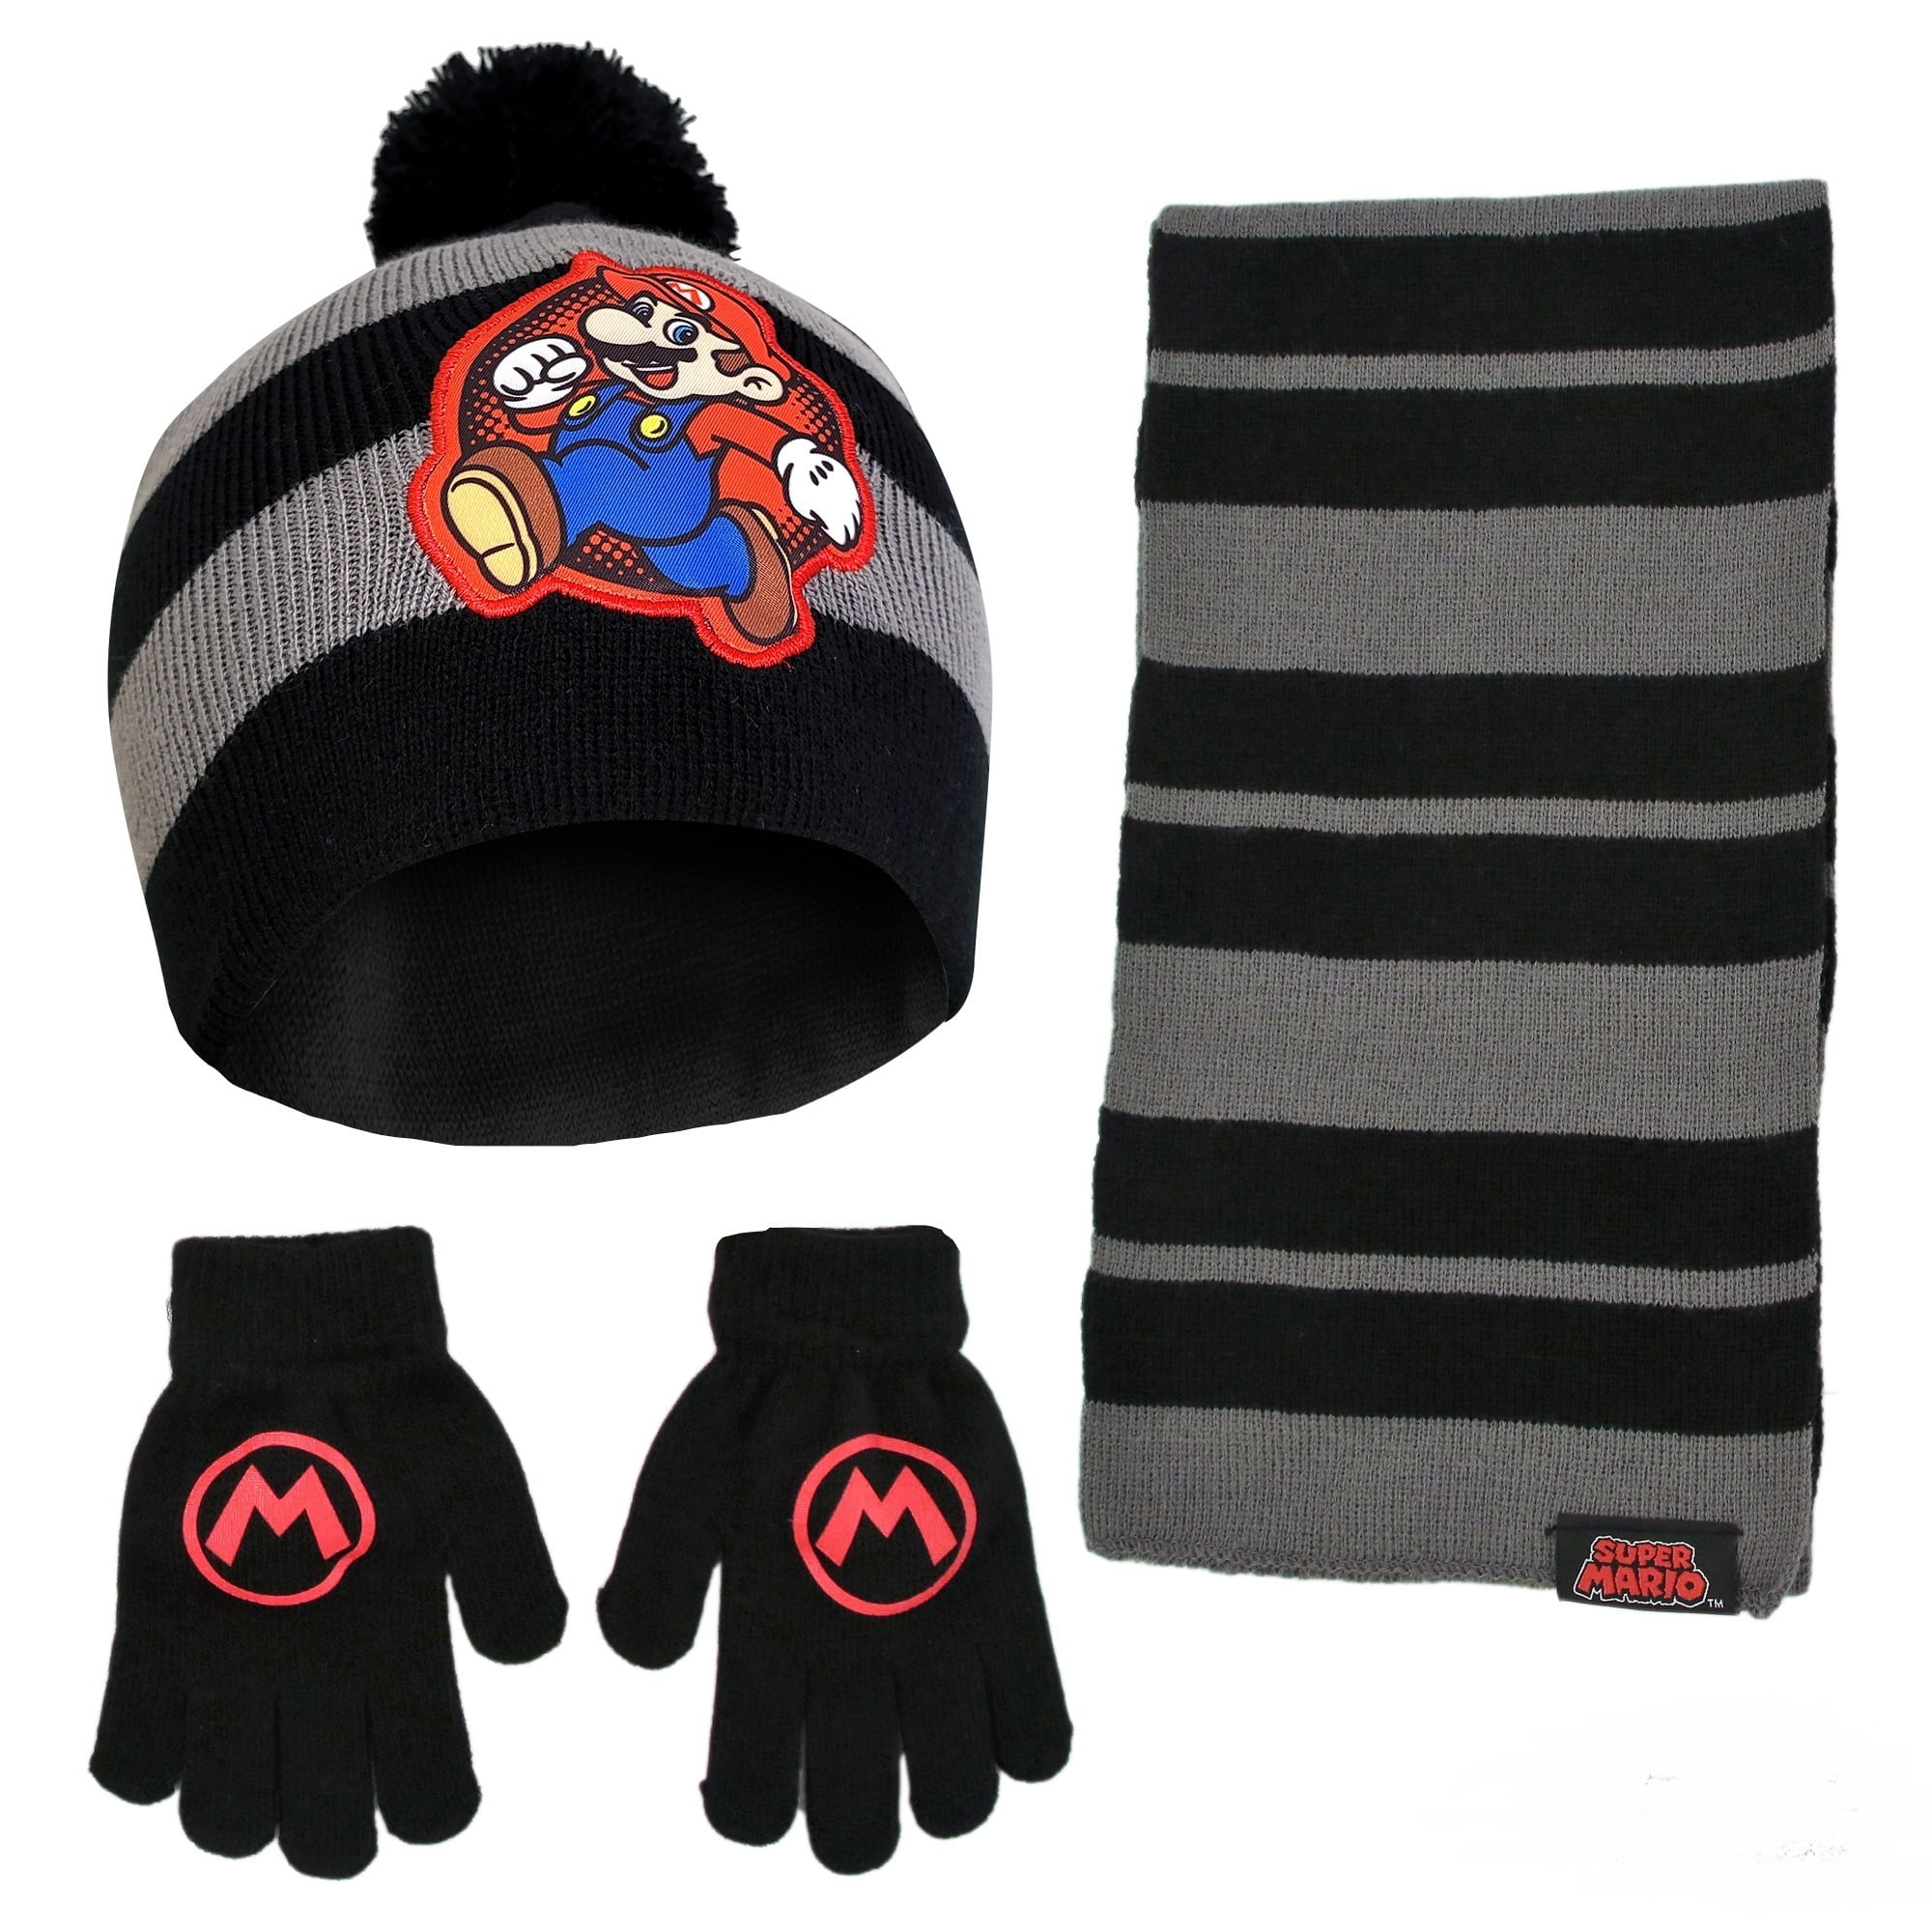 NIce Caps Kids Reversible Knitted Hat/Scarf/Magic Stretch Glove Accessory Set 